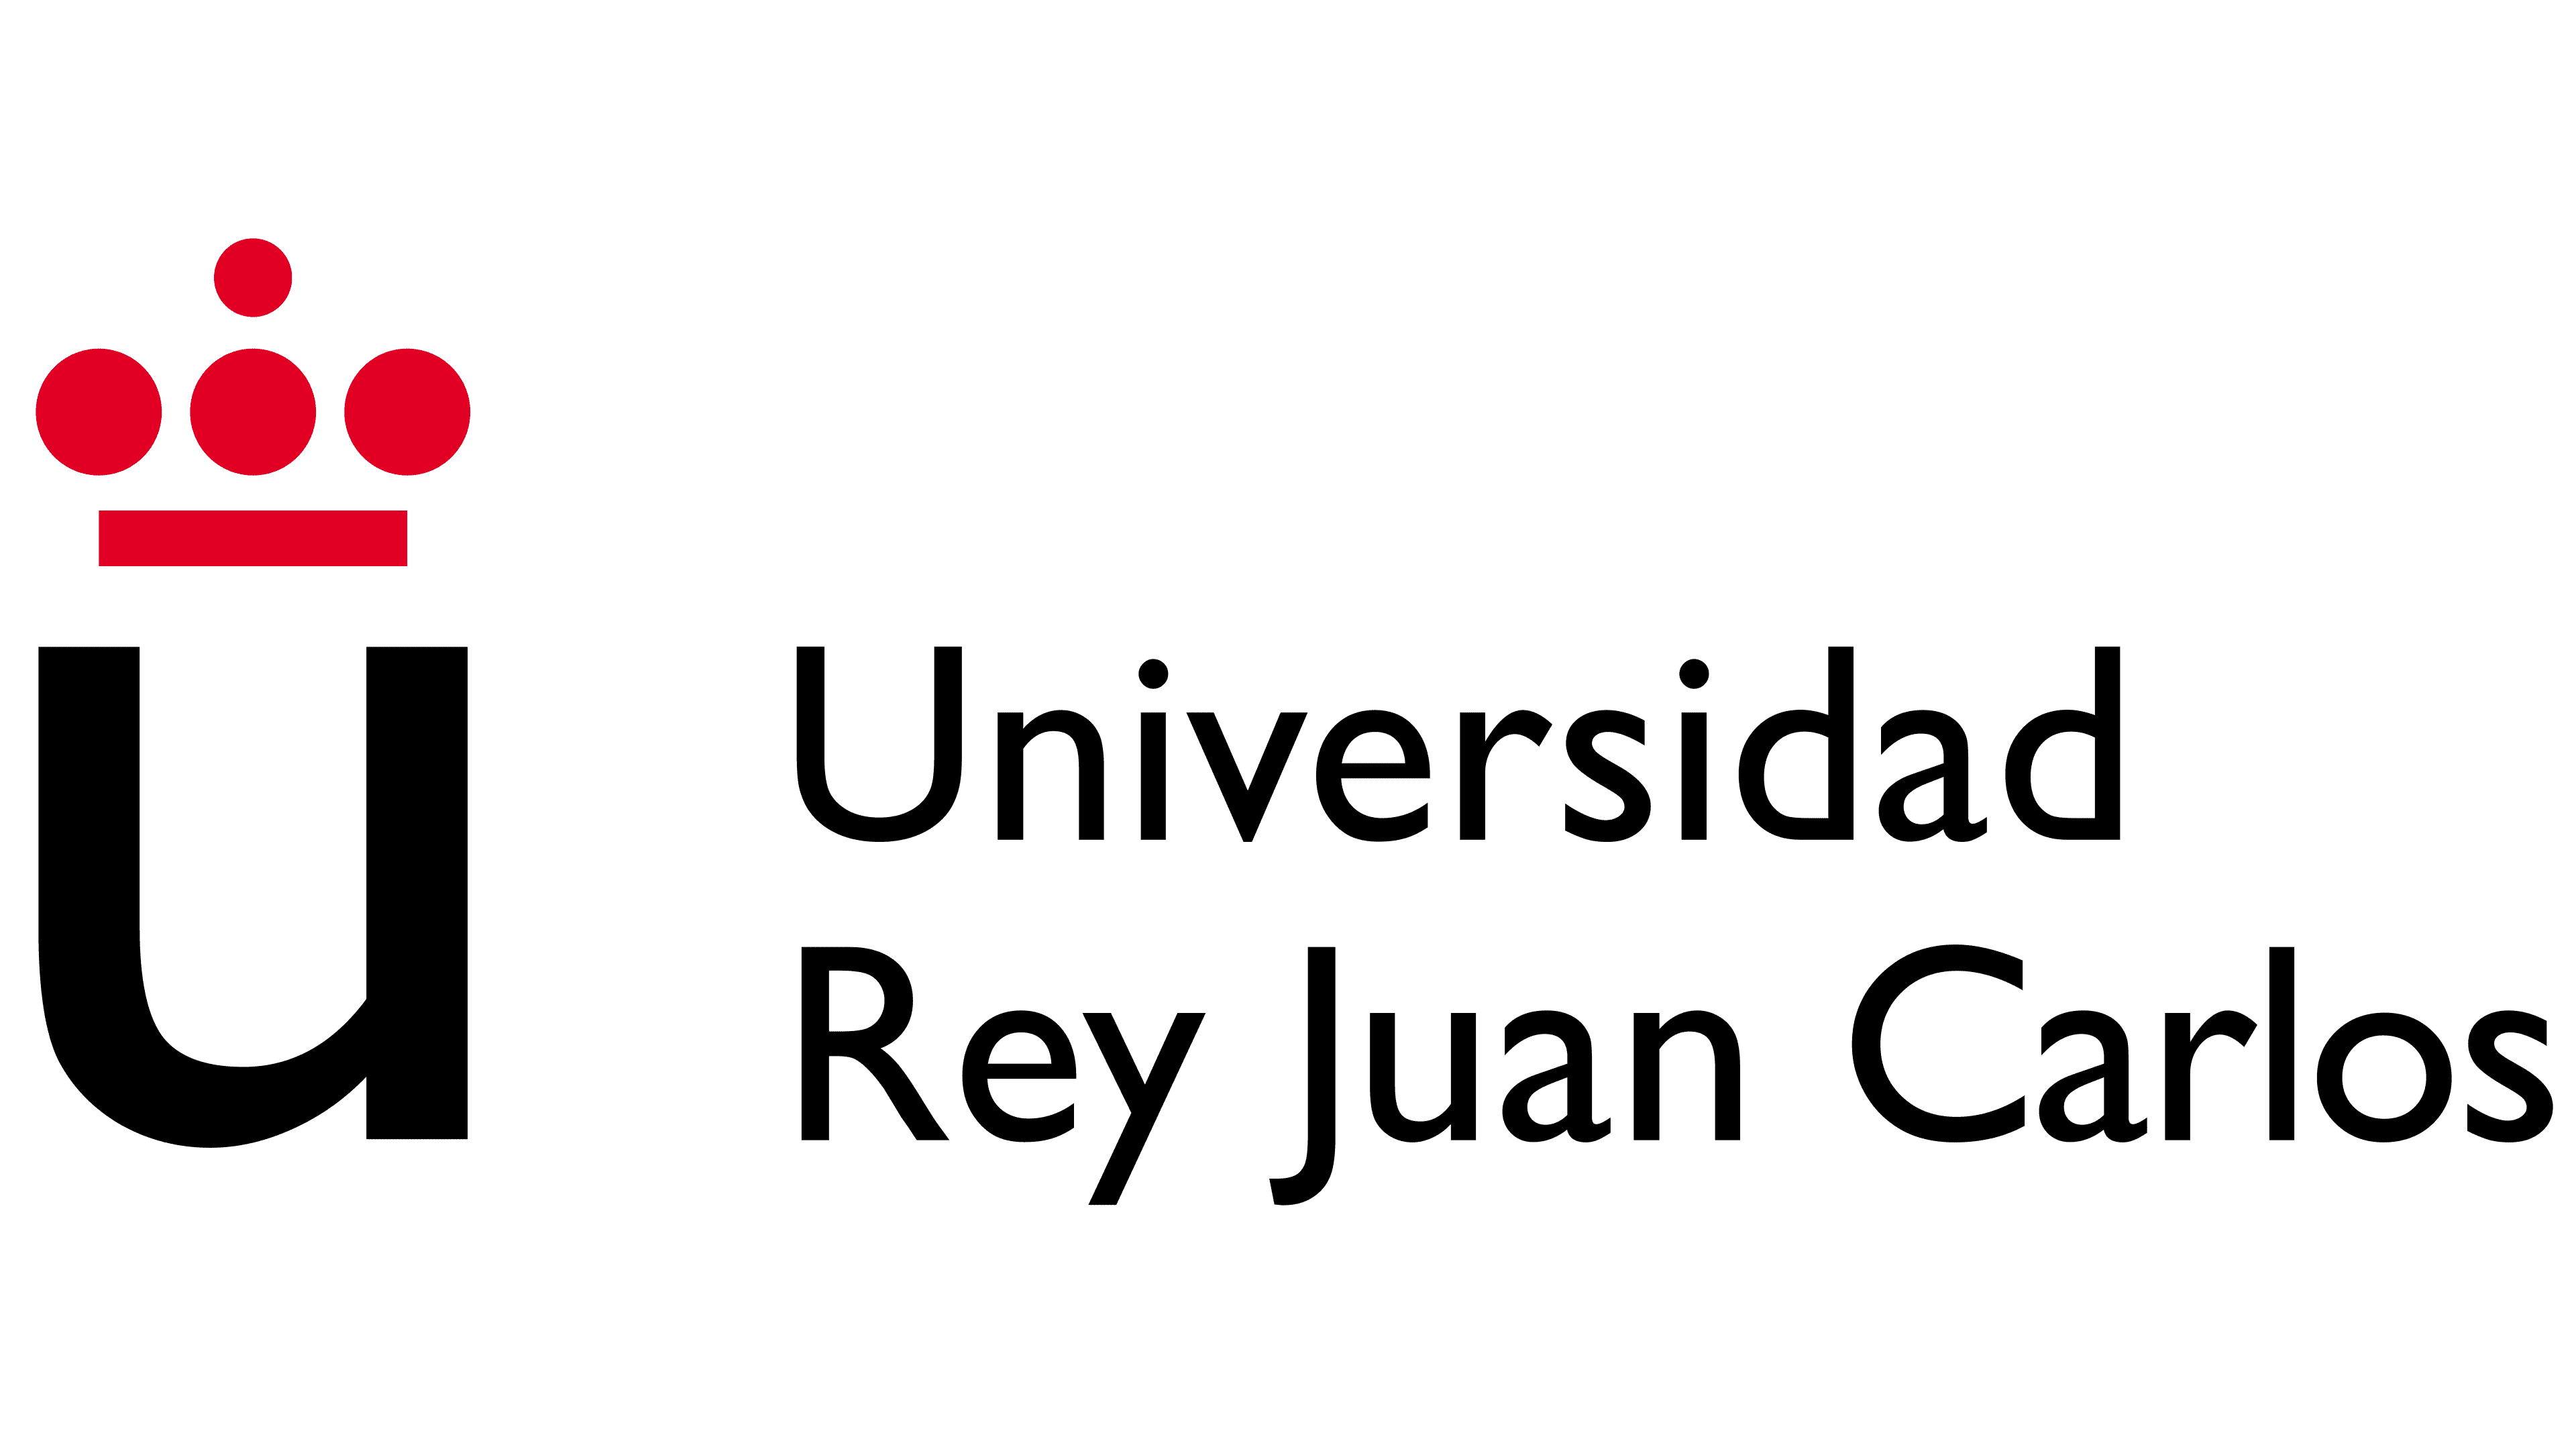 URJC Logo History | The most famous brands and company logos in the world